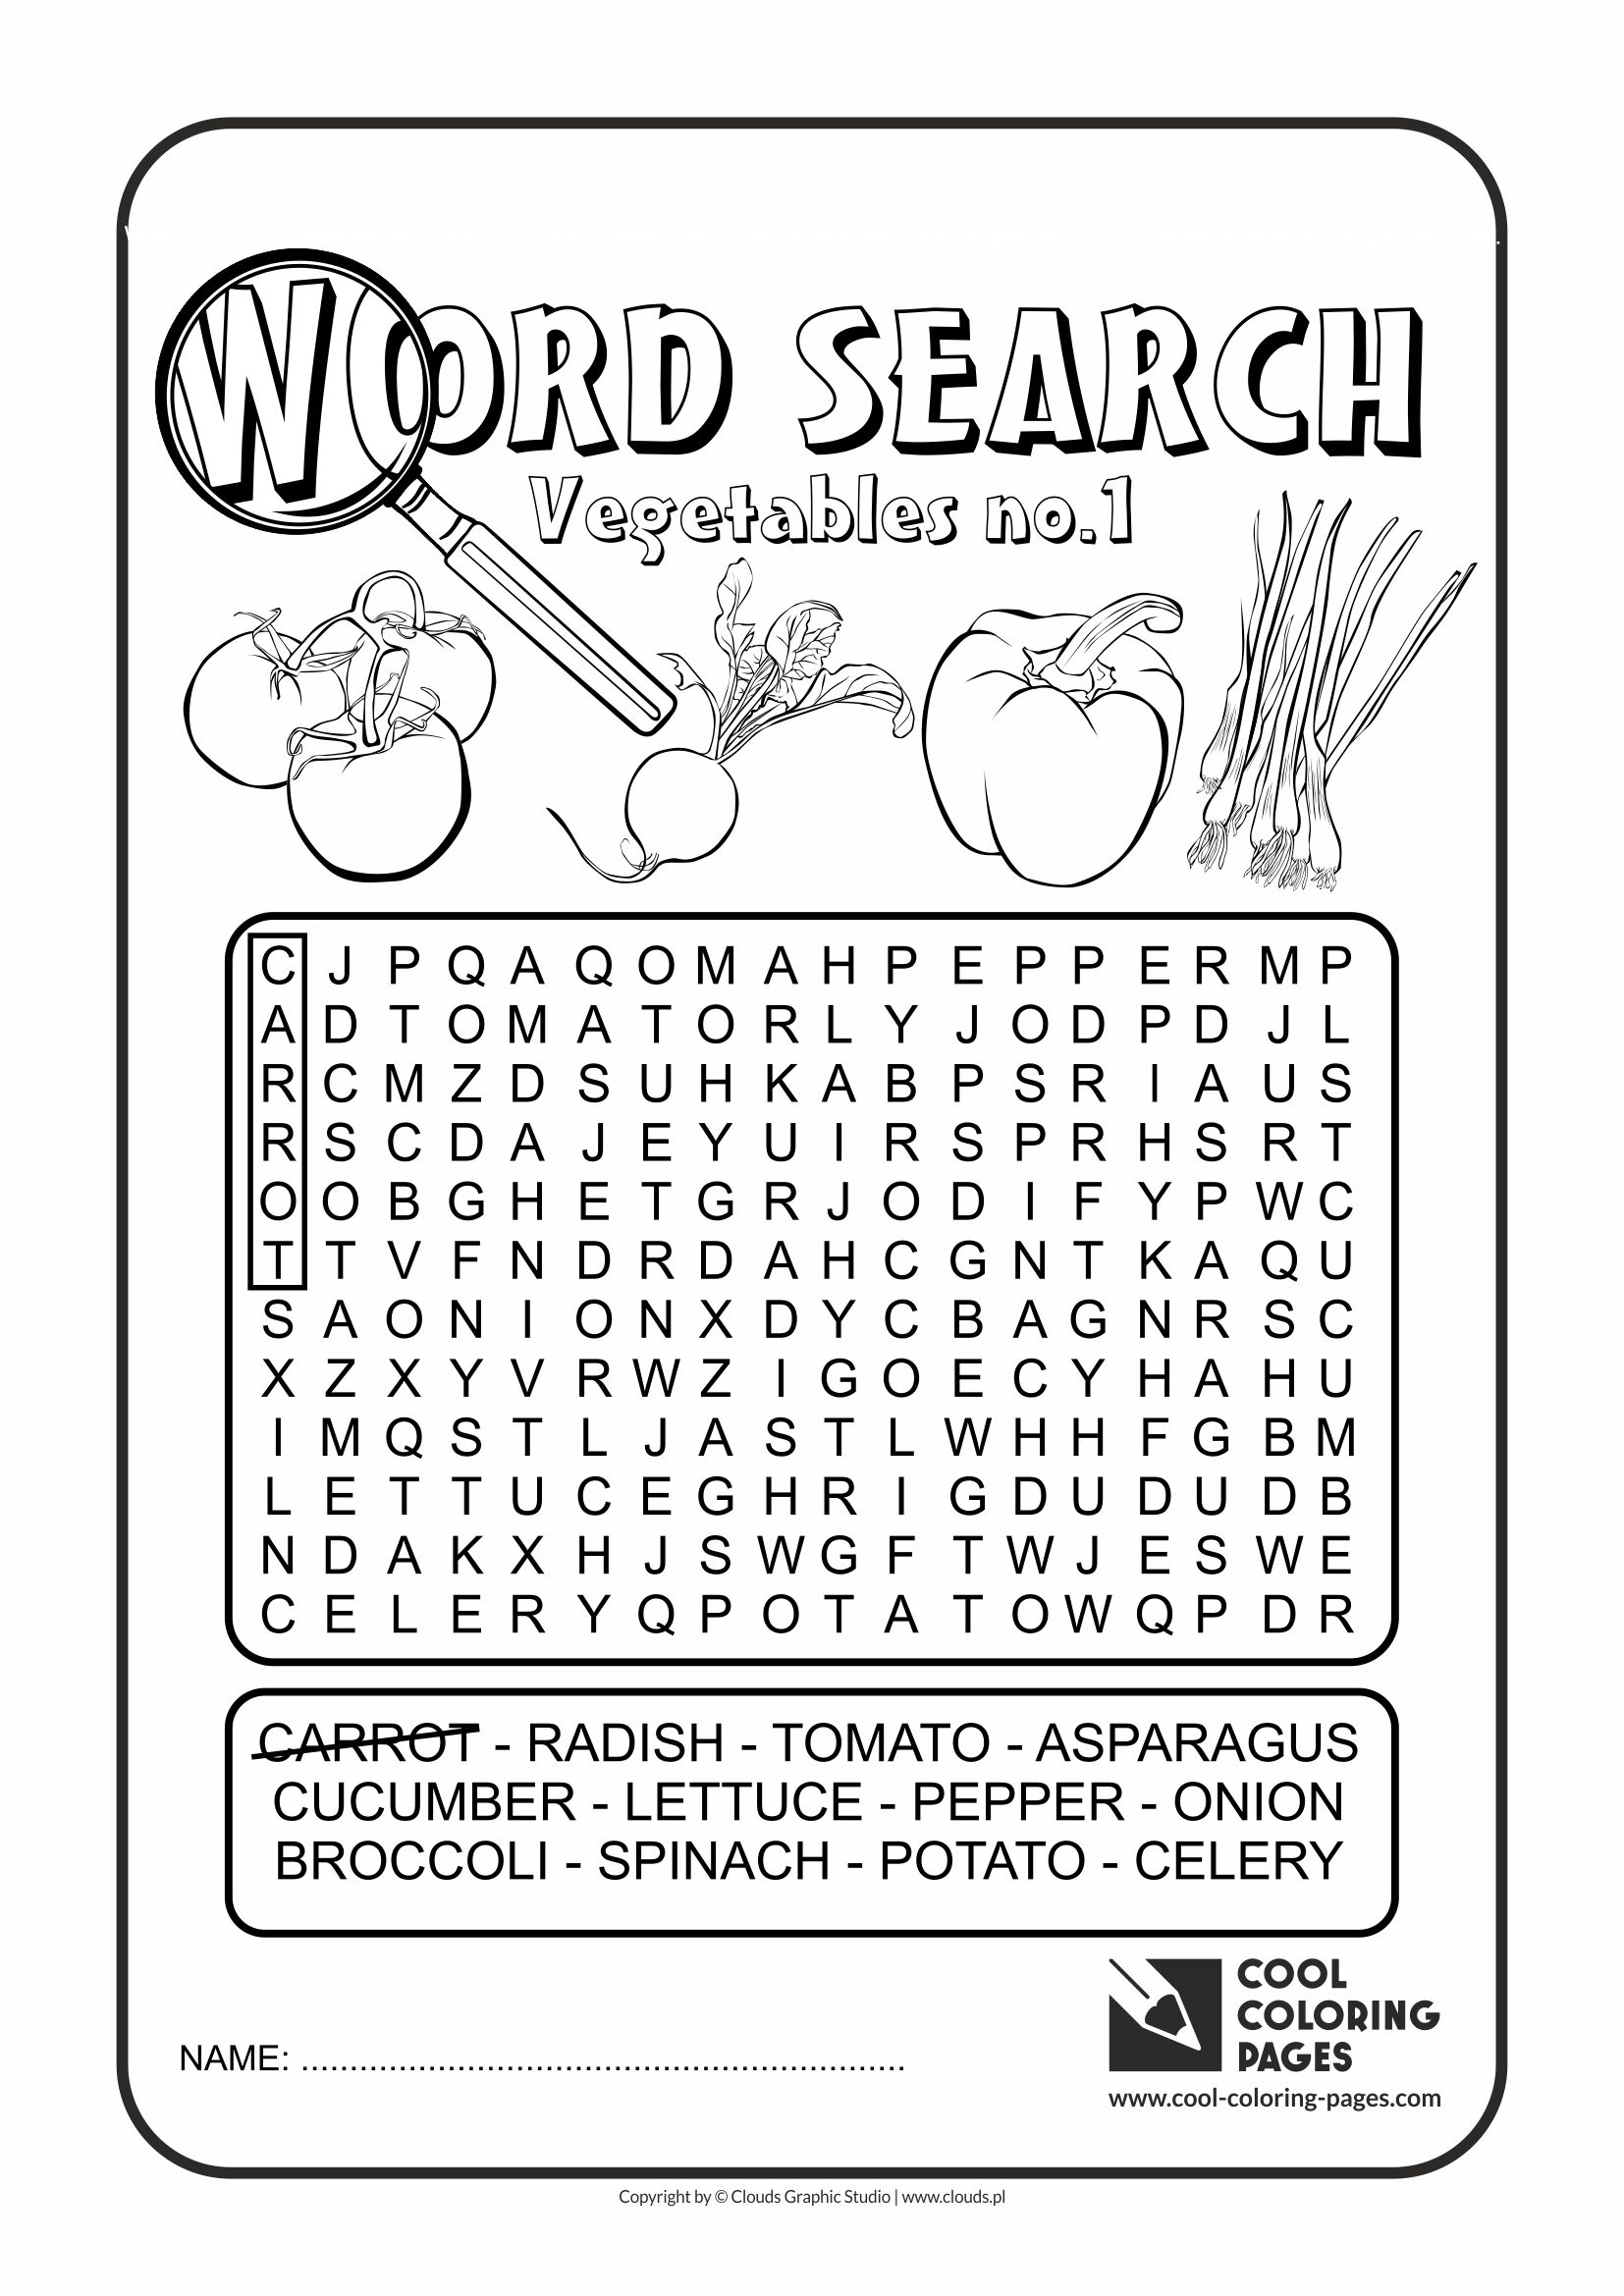 Cool Coloring Pages Word search vegetables no 1 - Cool Coloring Pages | Free ...